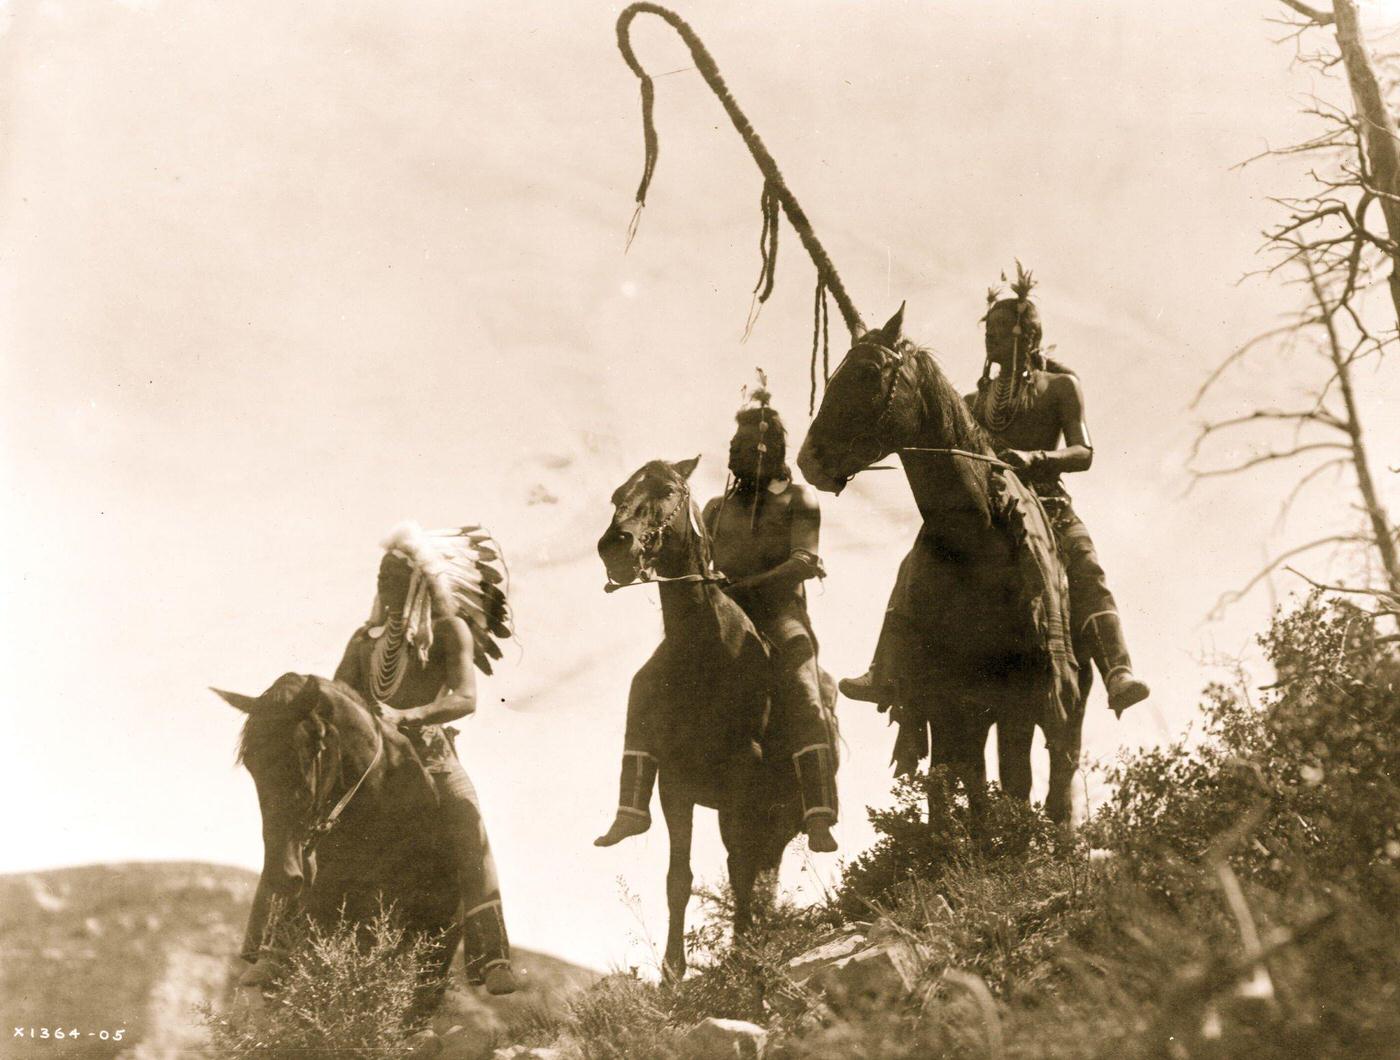 Upshaw, Which Way, and unidentified Indian on horseback, 1905